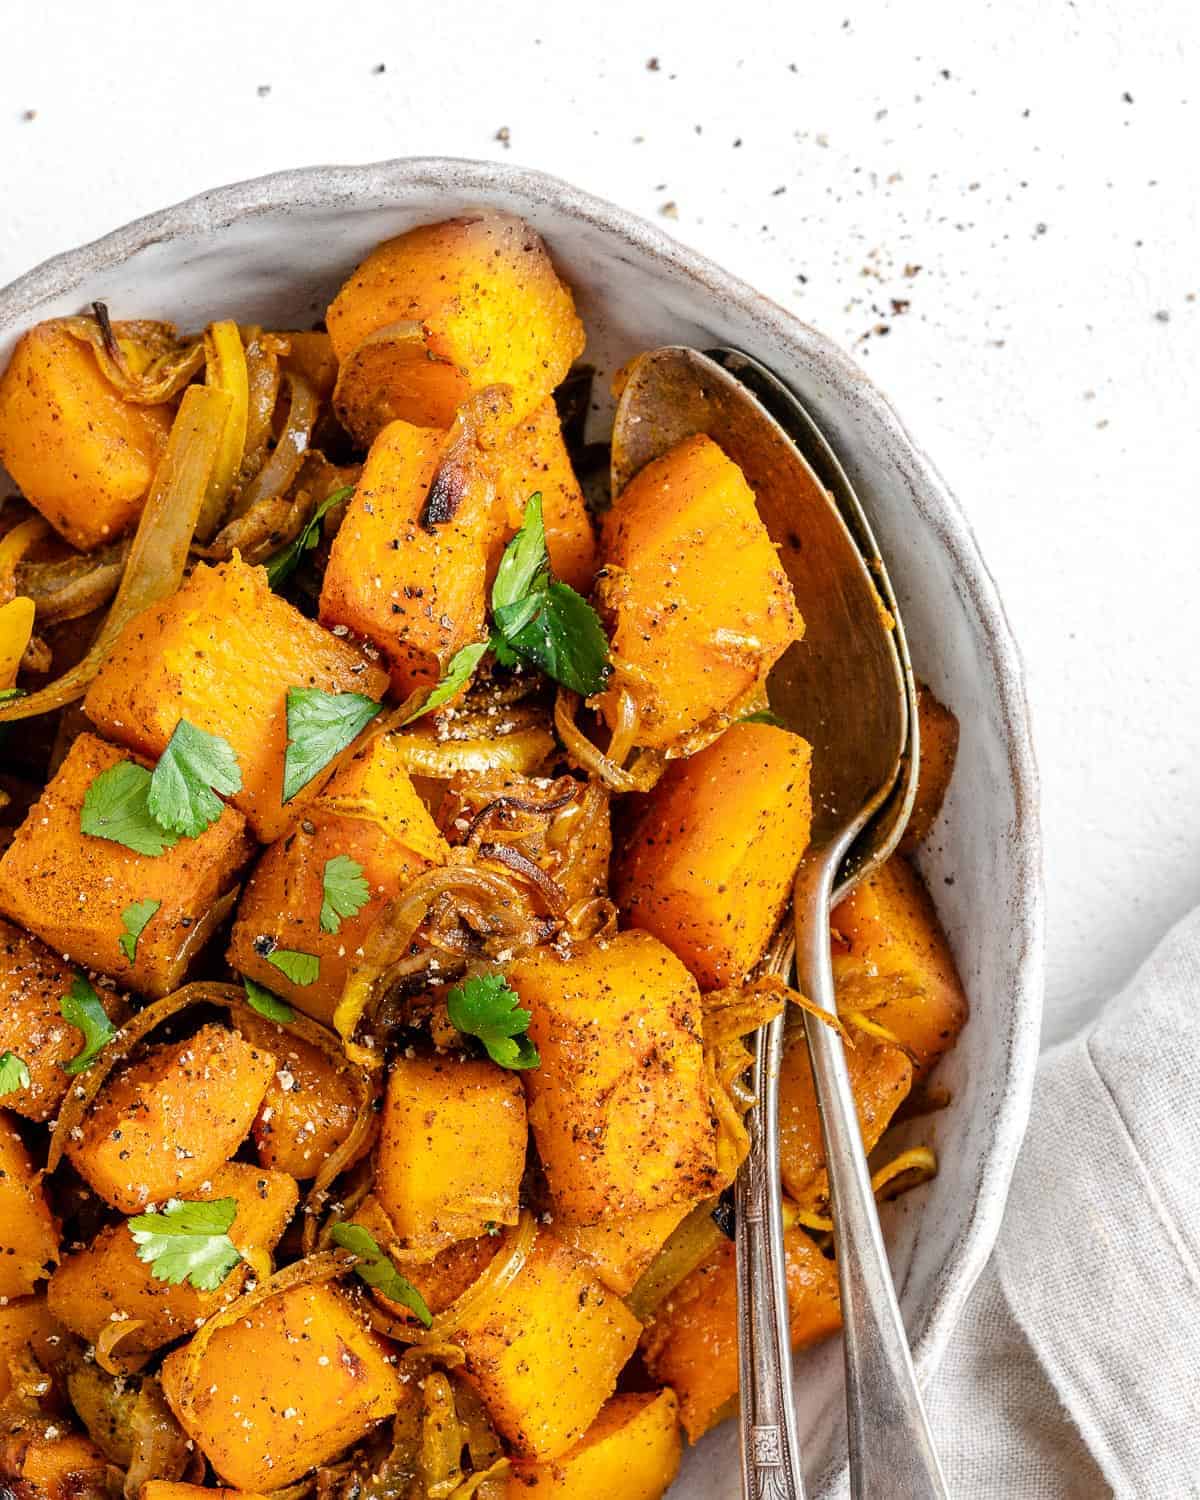 completed Roasted Butternut Squash with Indian Spices and Caramelized Onions in a serving tray against white background